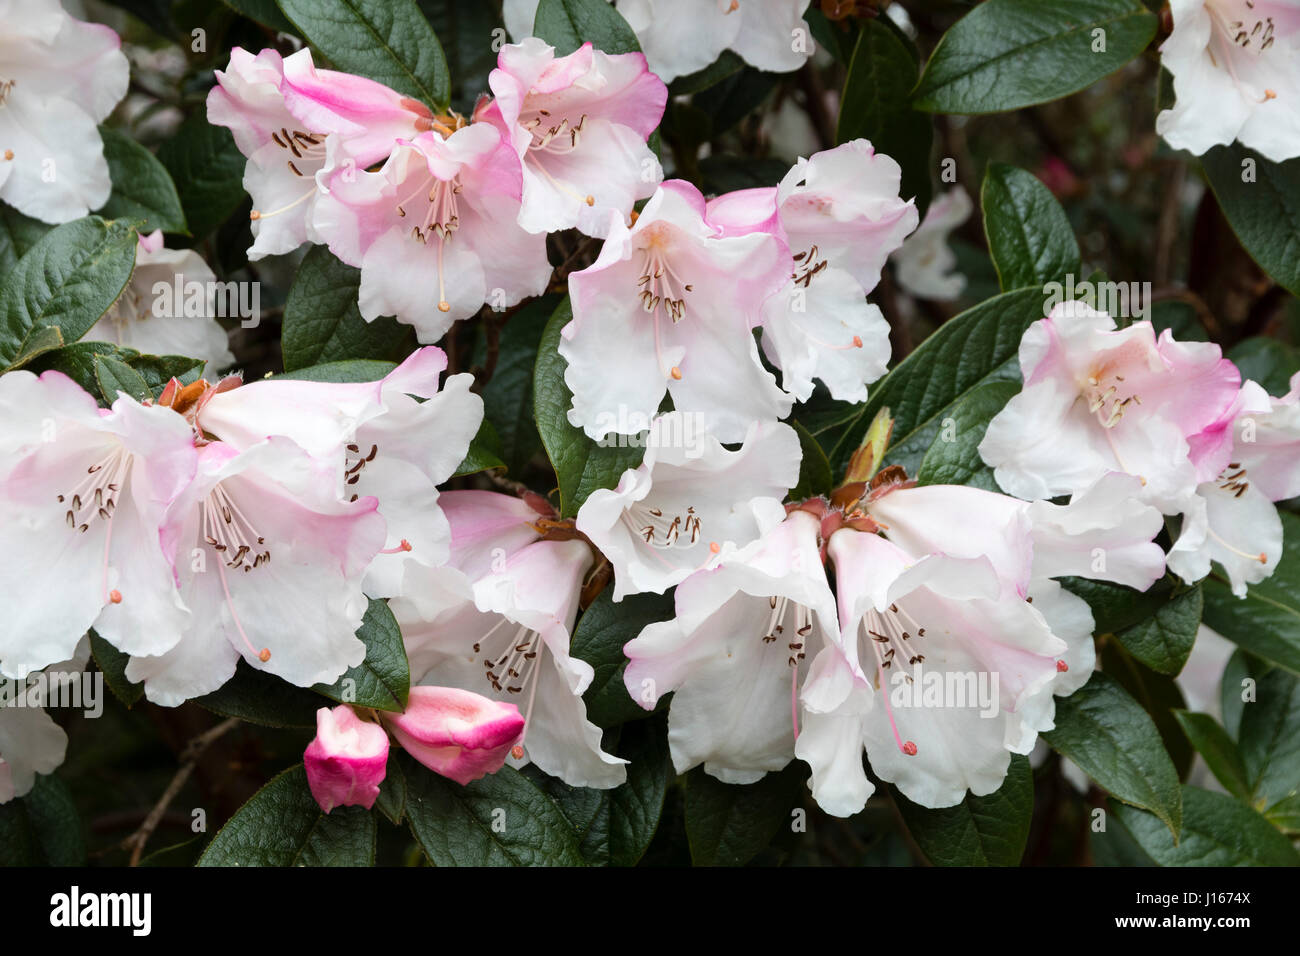 Pink And White Spring Flowers Of The Heavily Scented Evergreen Stock Photo Alamy